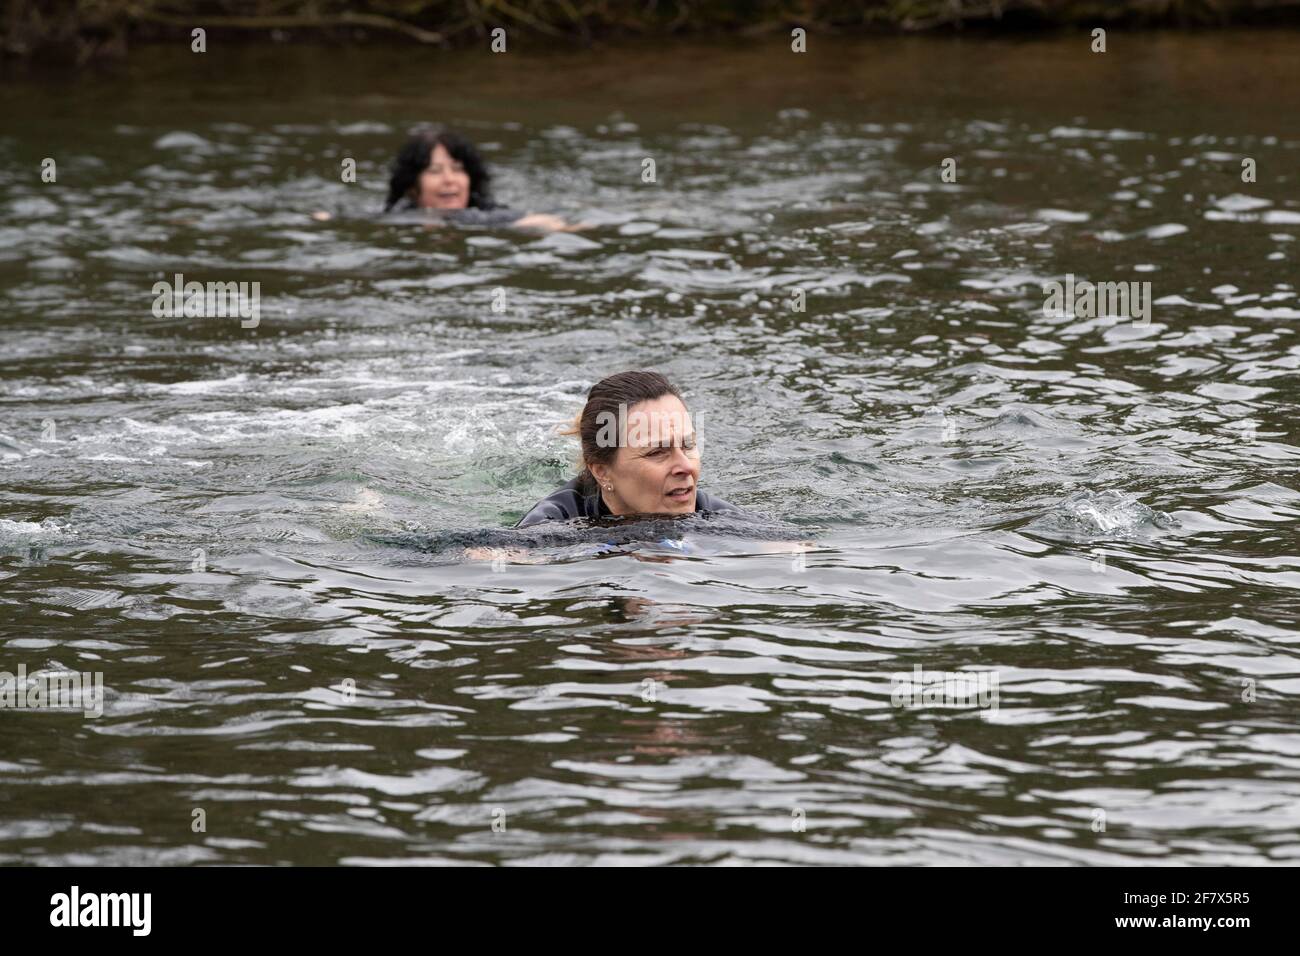 Northampton, UK. 10th April 2021. Shirley Payne Mann with support from  Denise Anderson and Penny Etheridge (left to right) are wild swimming in  freezing water of a lake for as long as